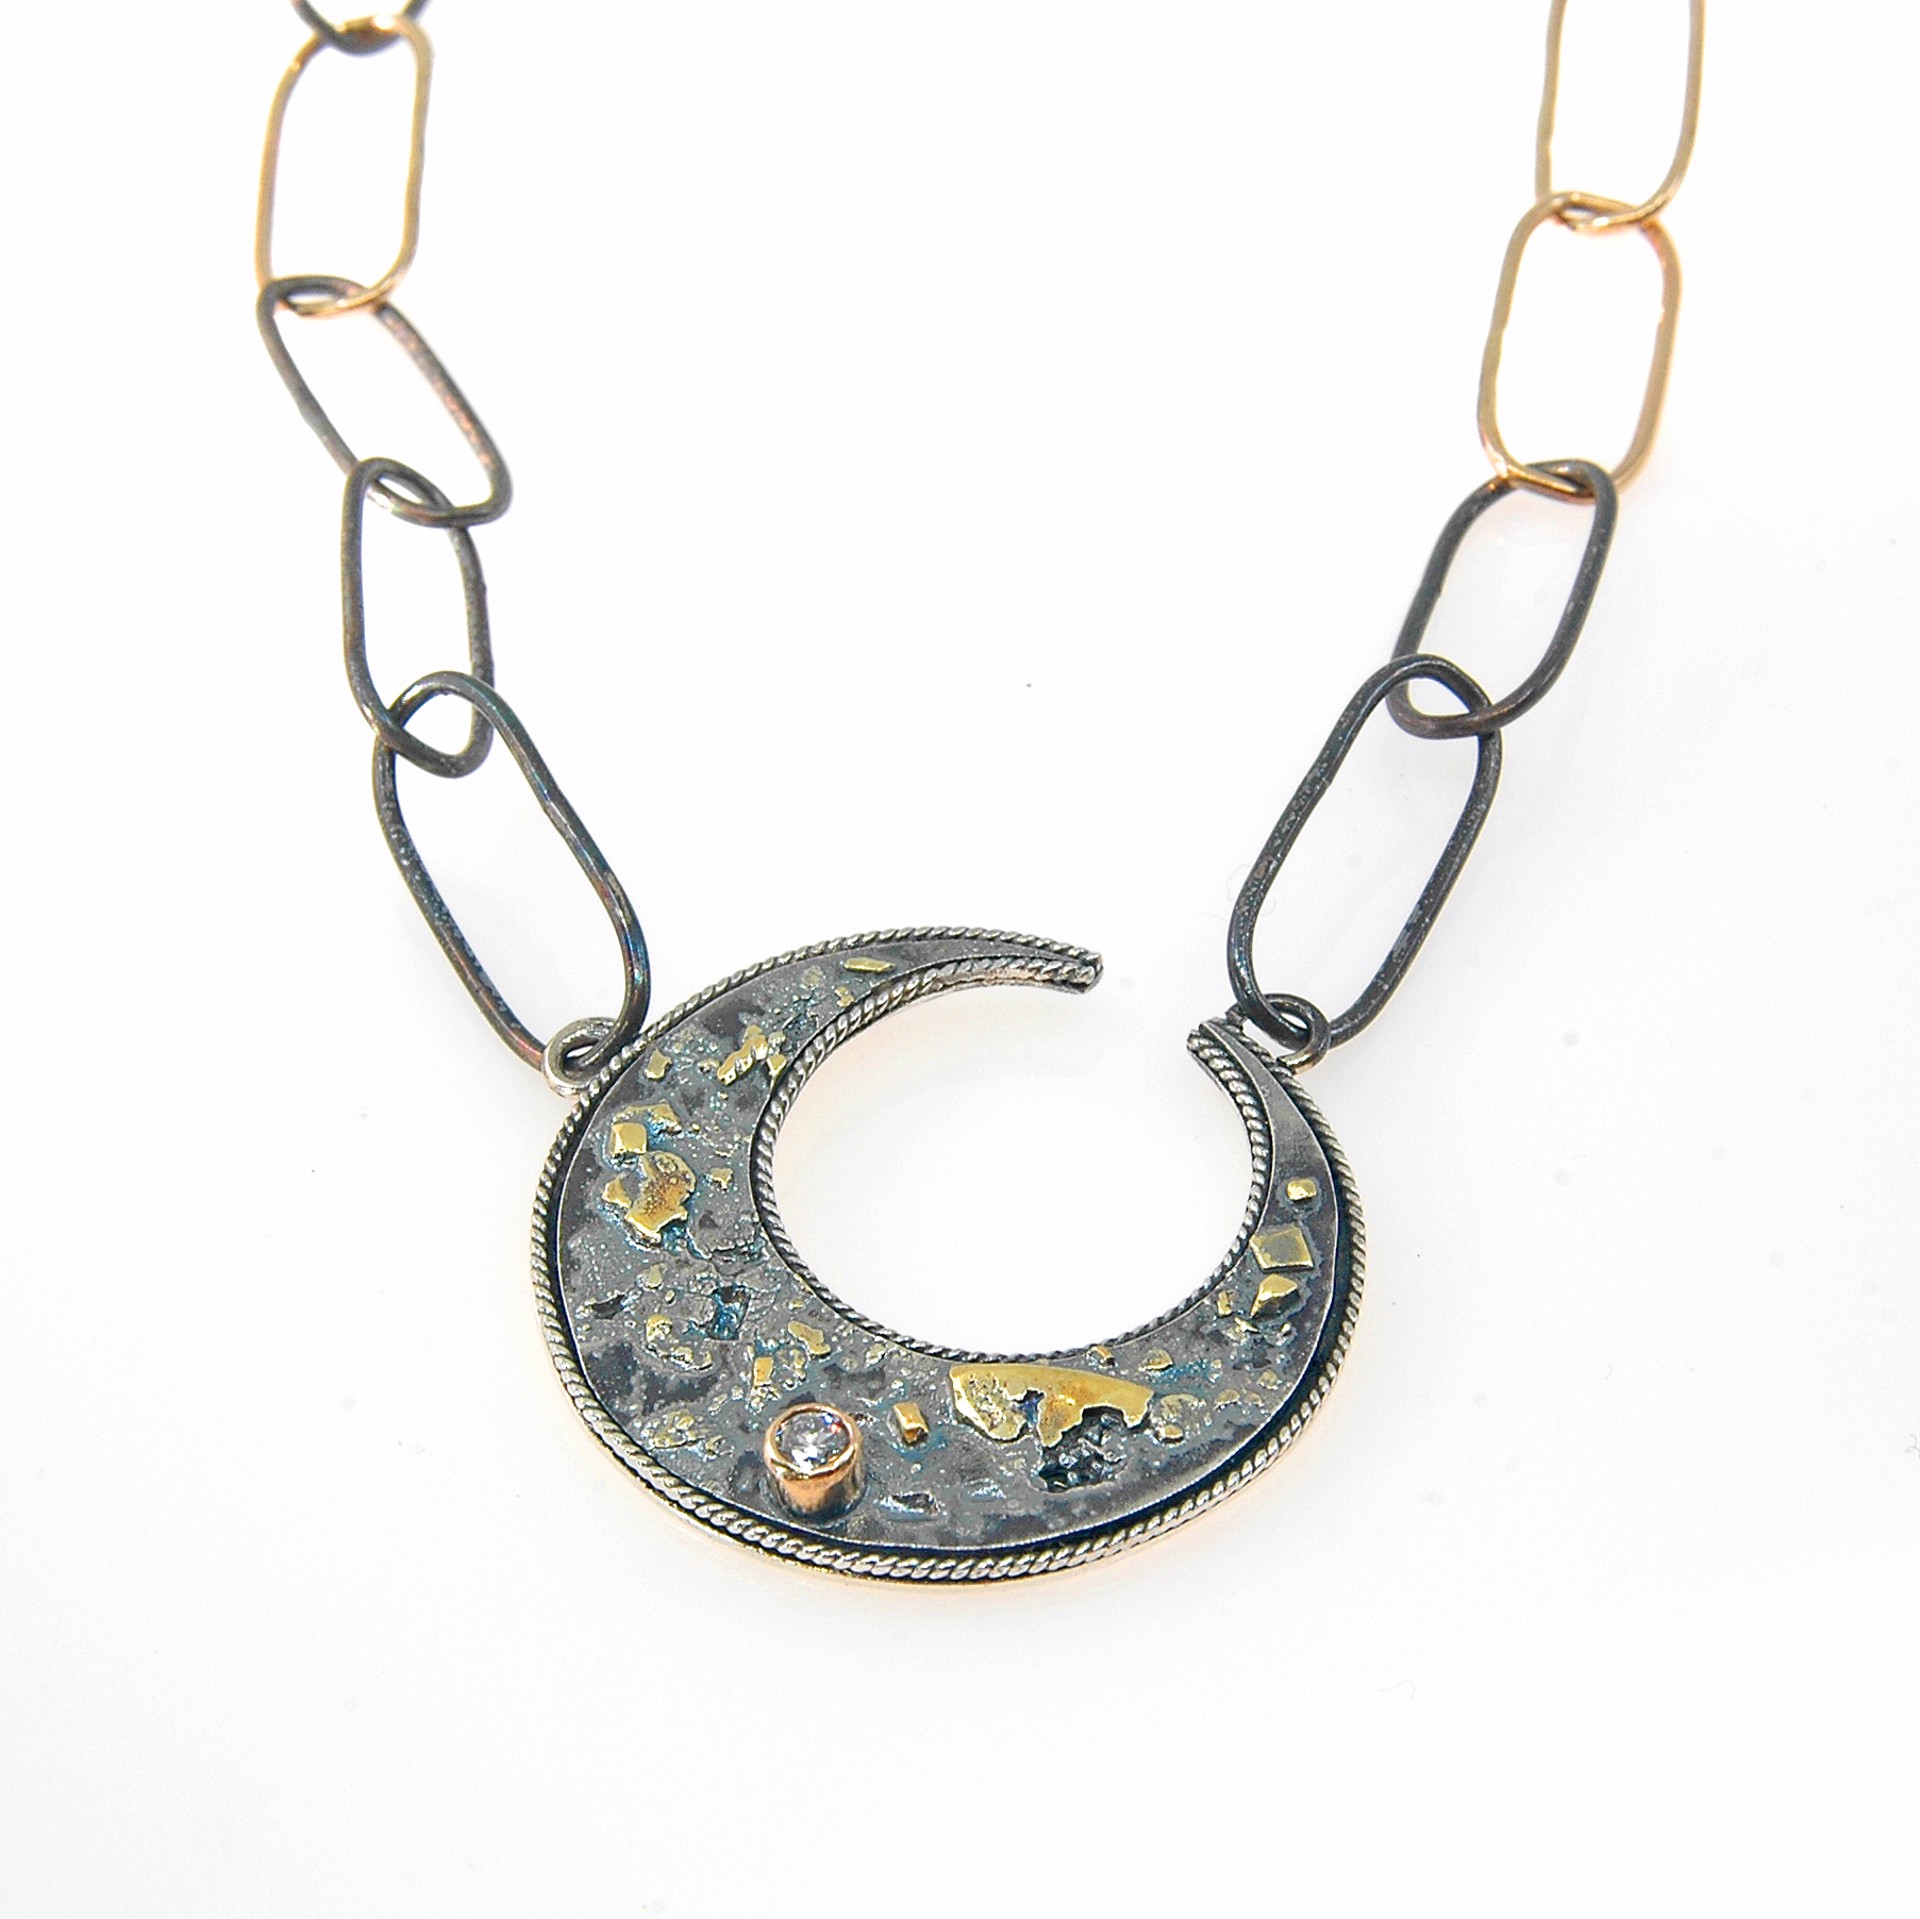 Bil, Goddess of the Waning Moon Necklace by Debra Carus